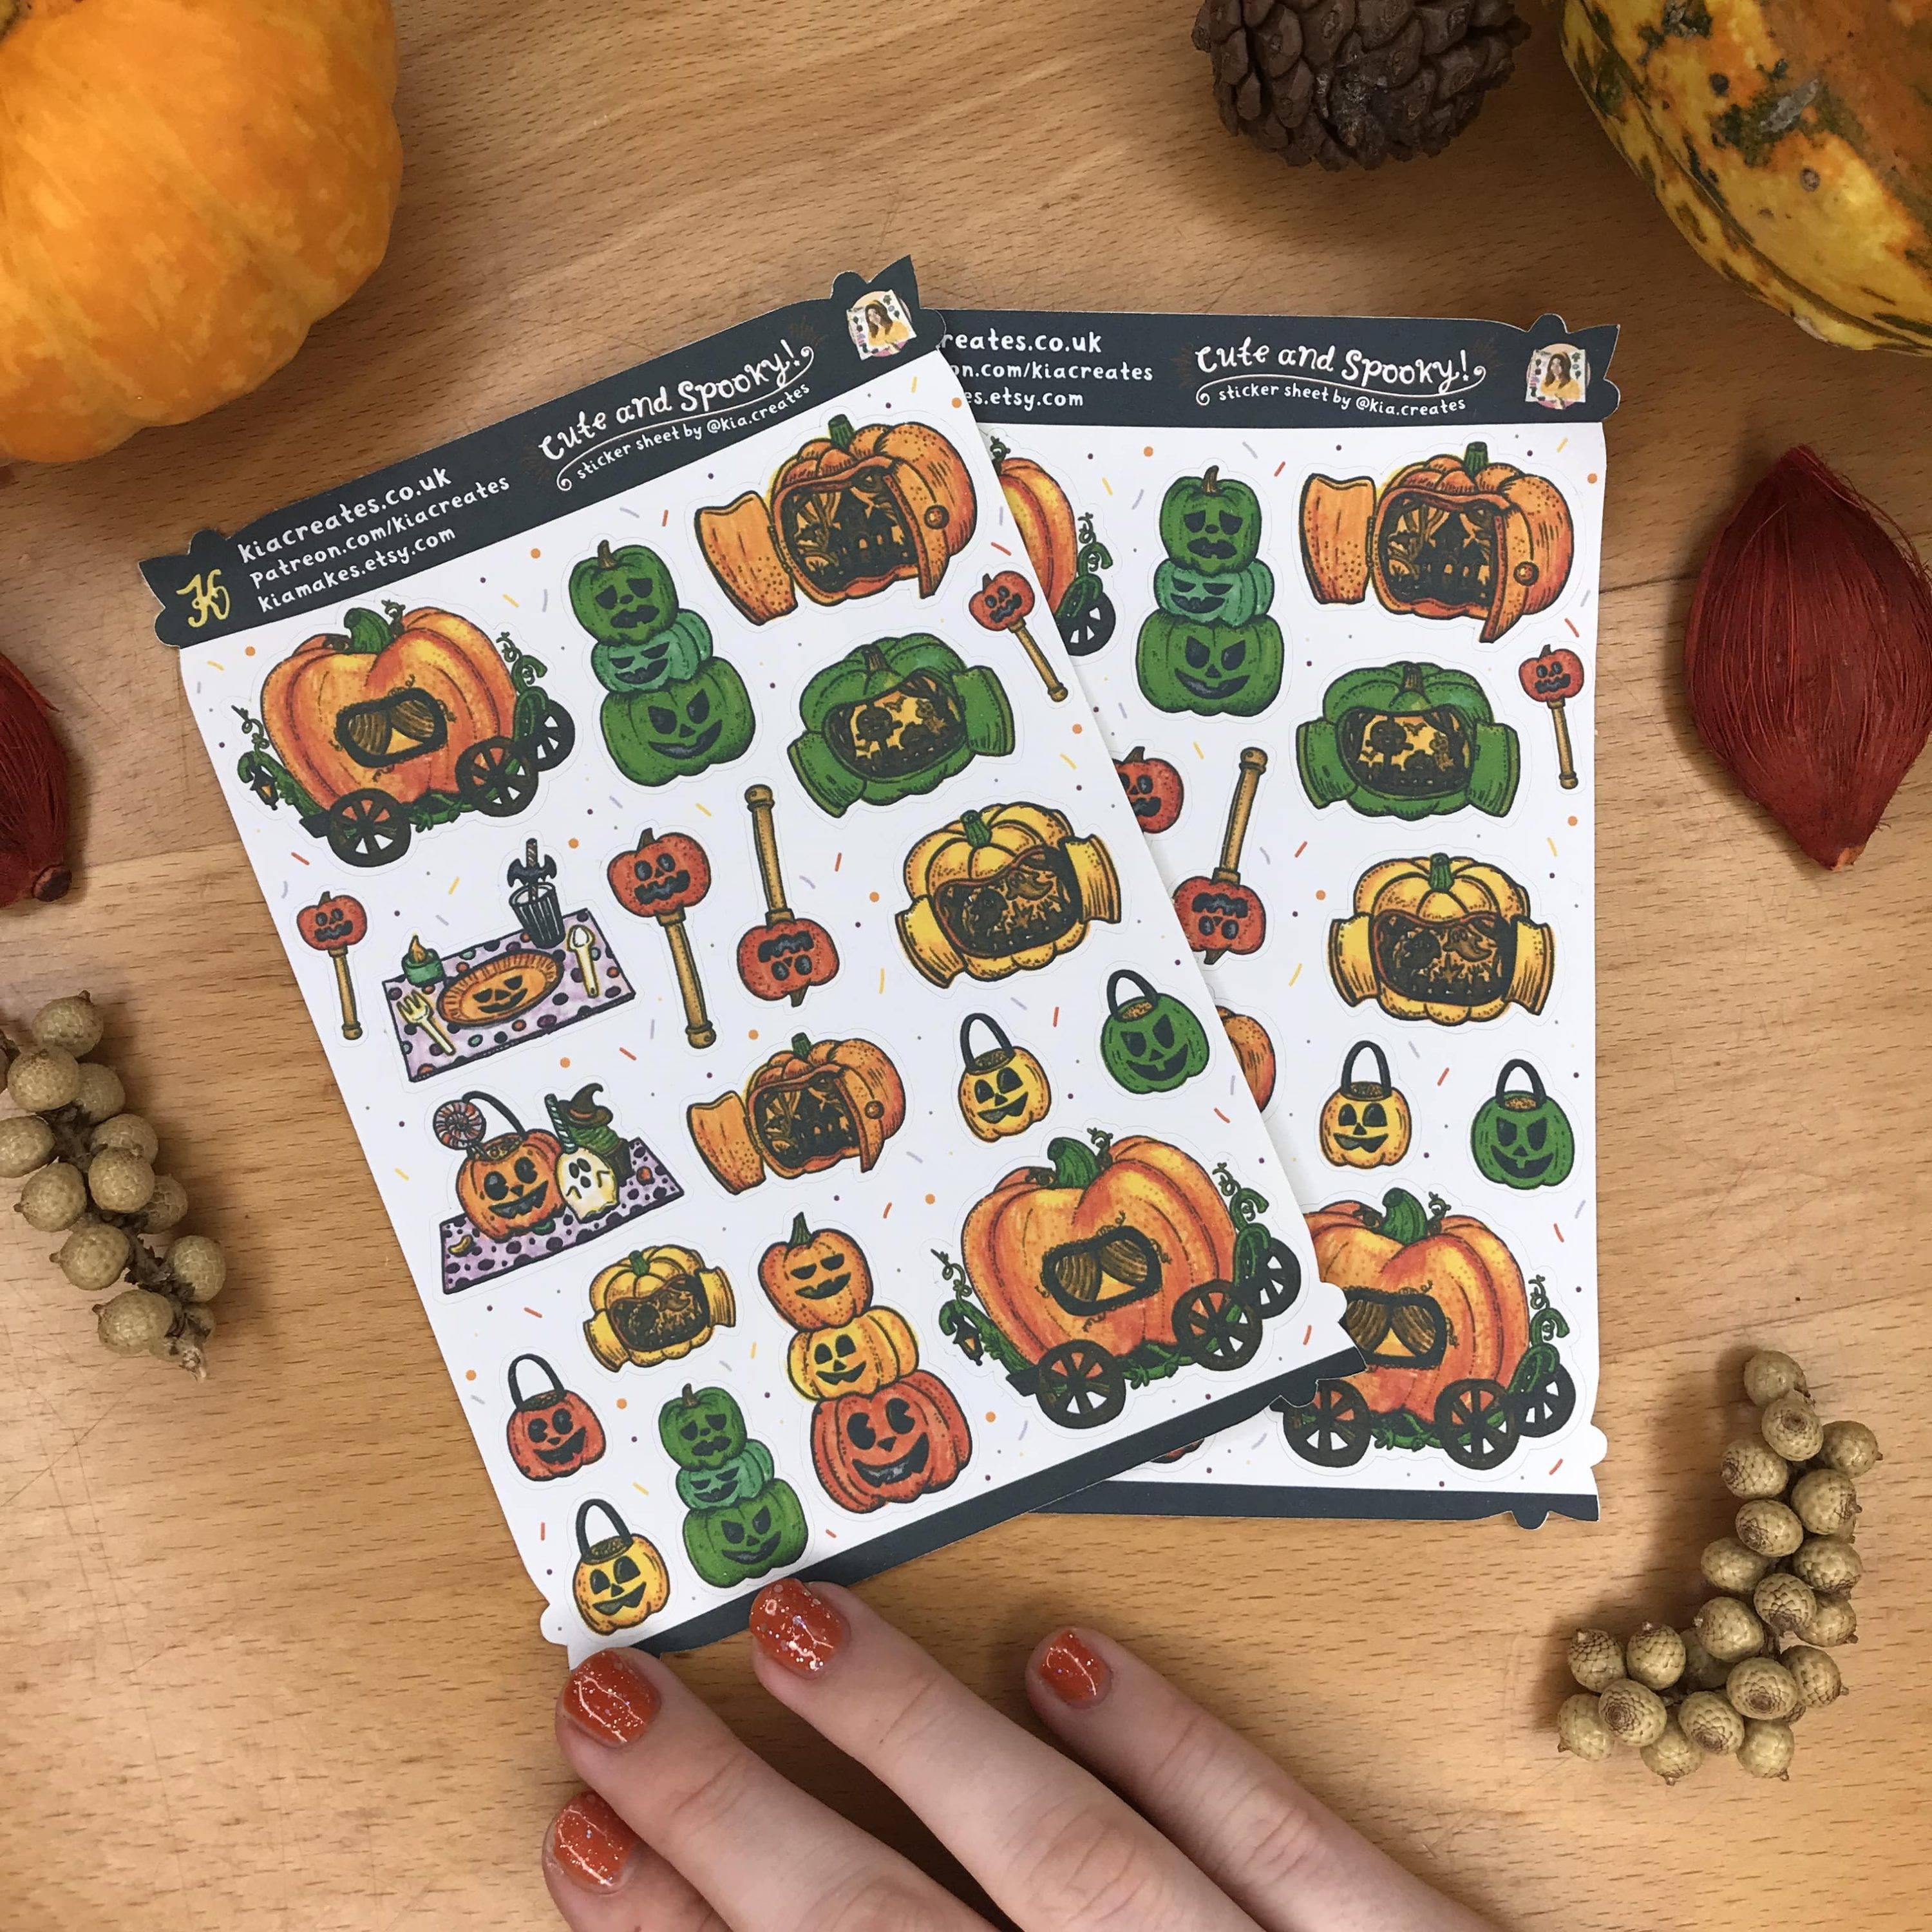 Cute Halloween Stickers inspired by animal crossing for halloween journaling by Kia Creates